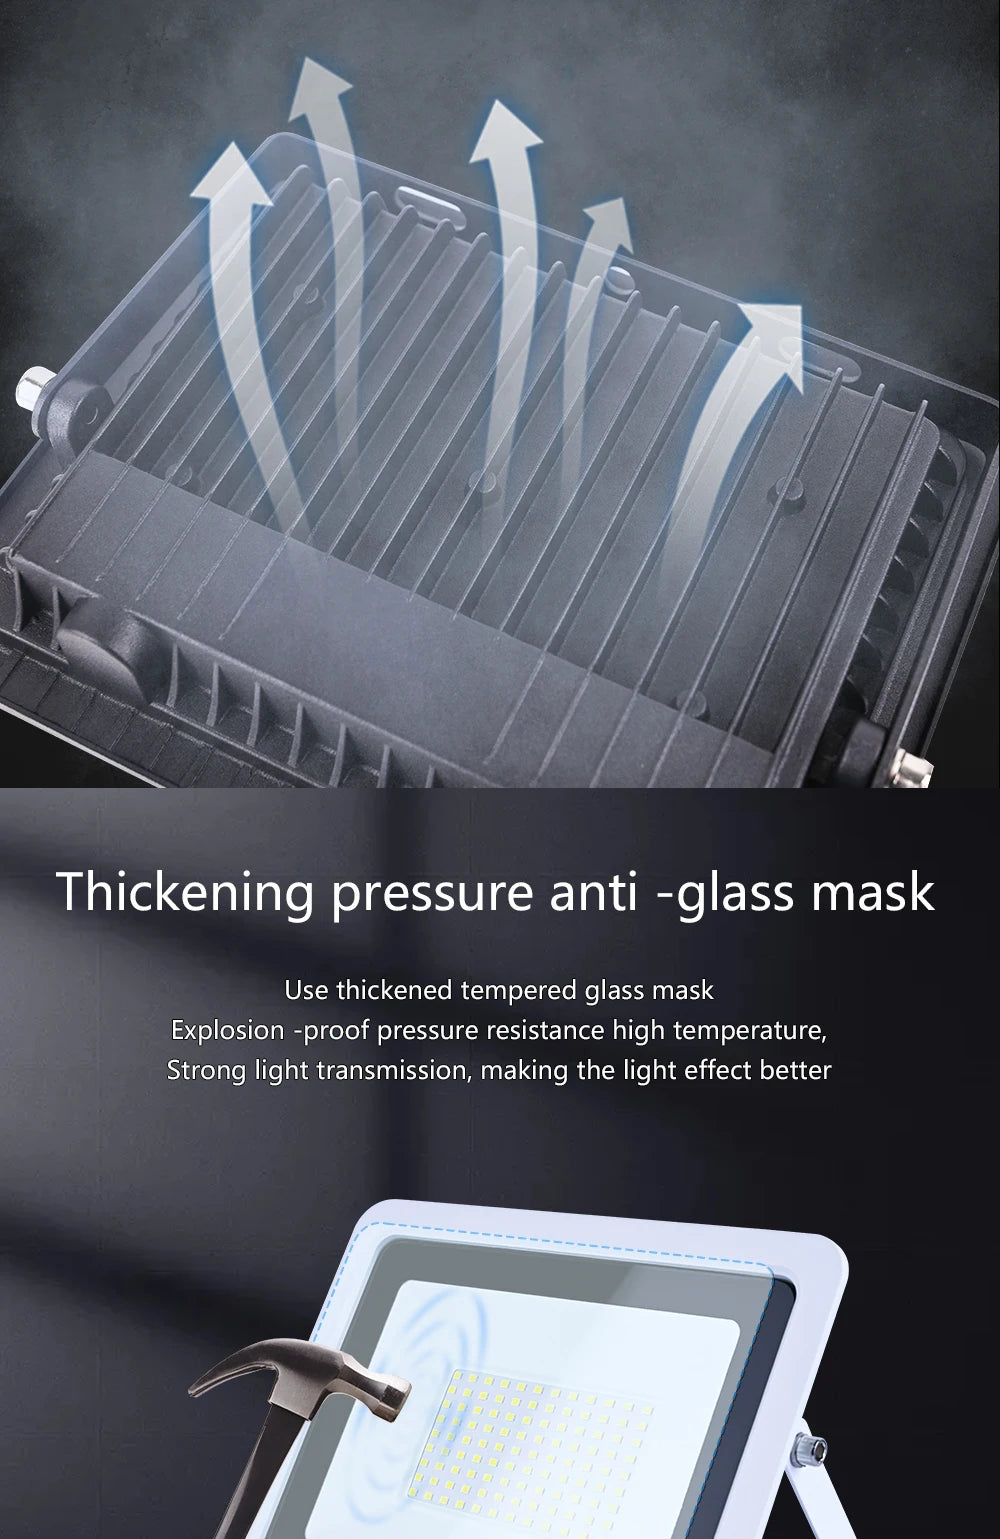 LED Flood Light, Thickened, tempered glass mask resists explosions, heat, and bright lights while maintaining clarity.